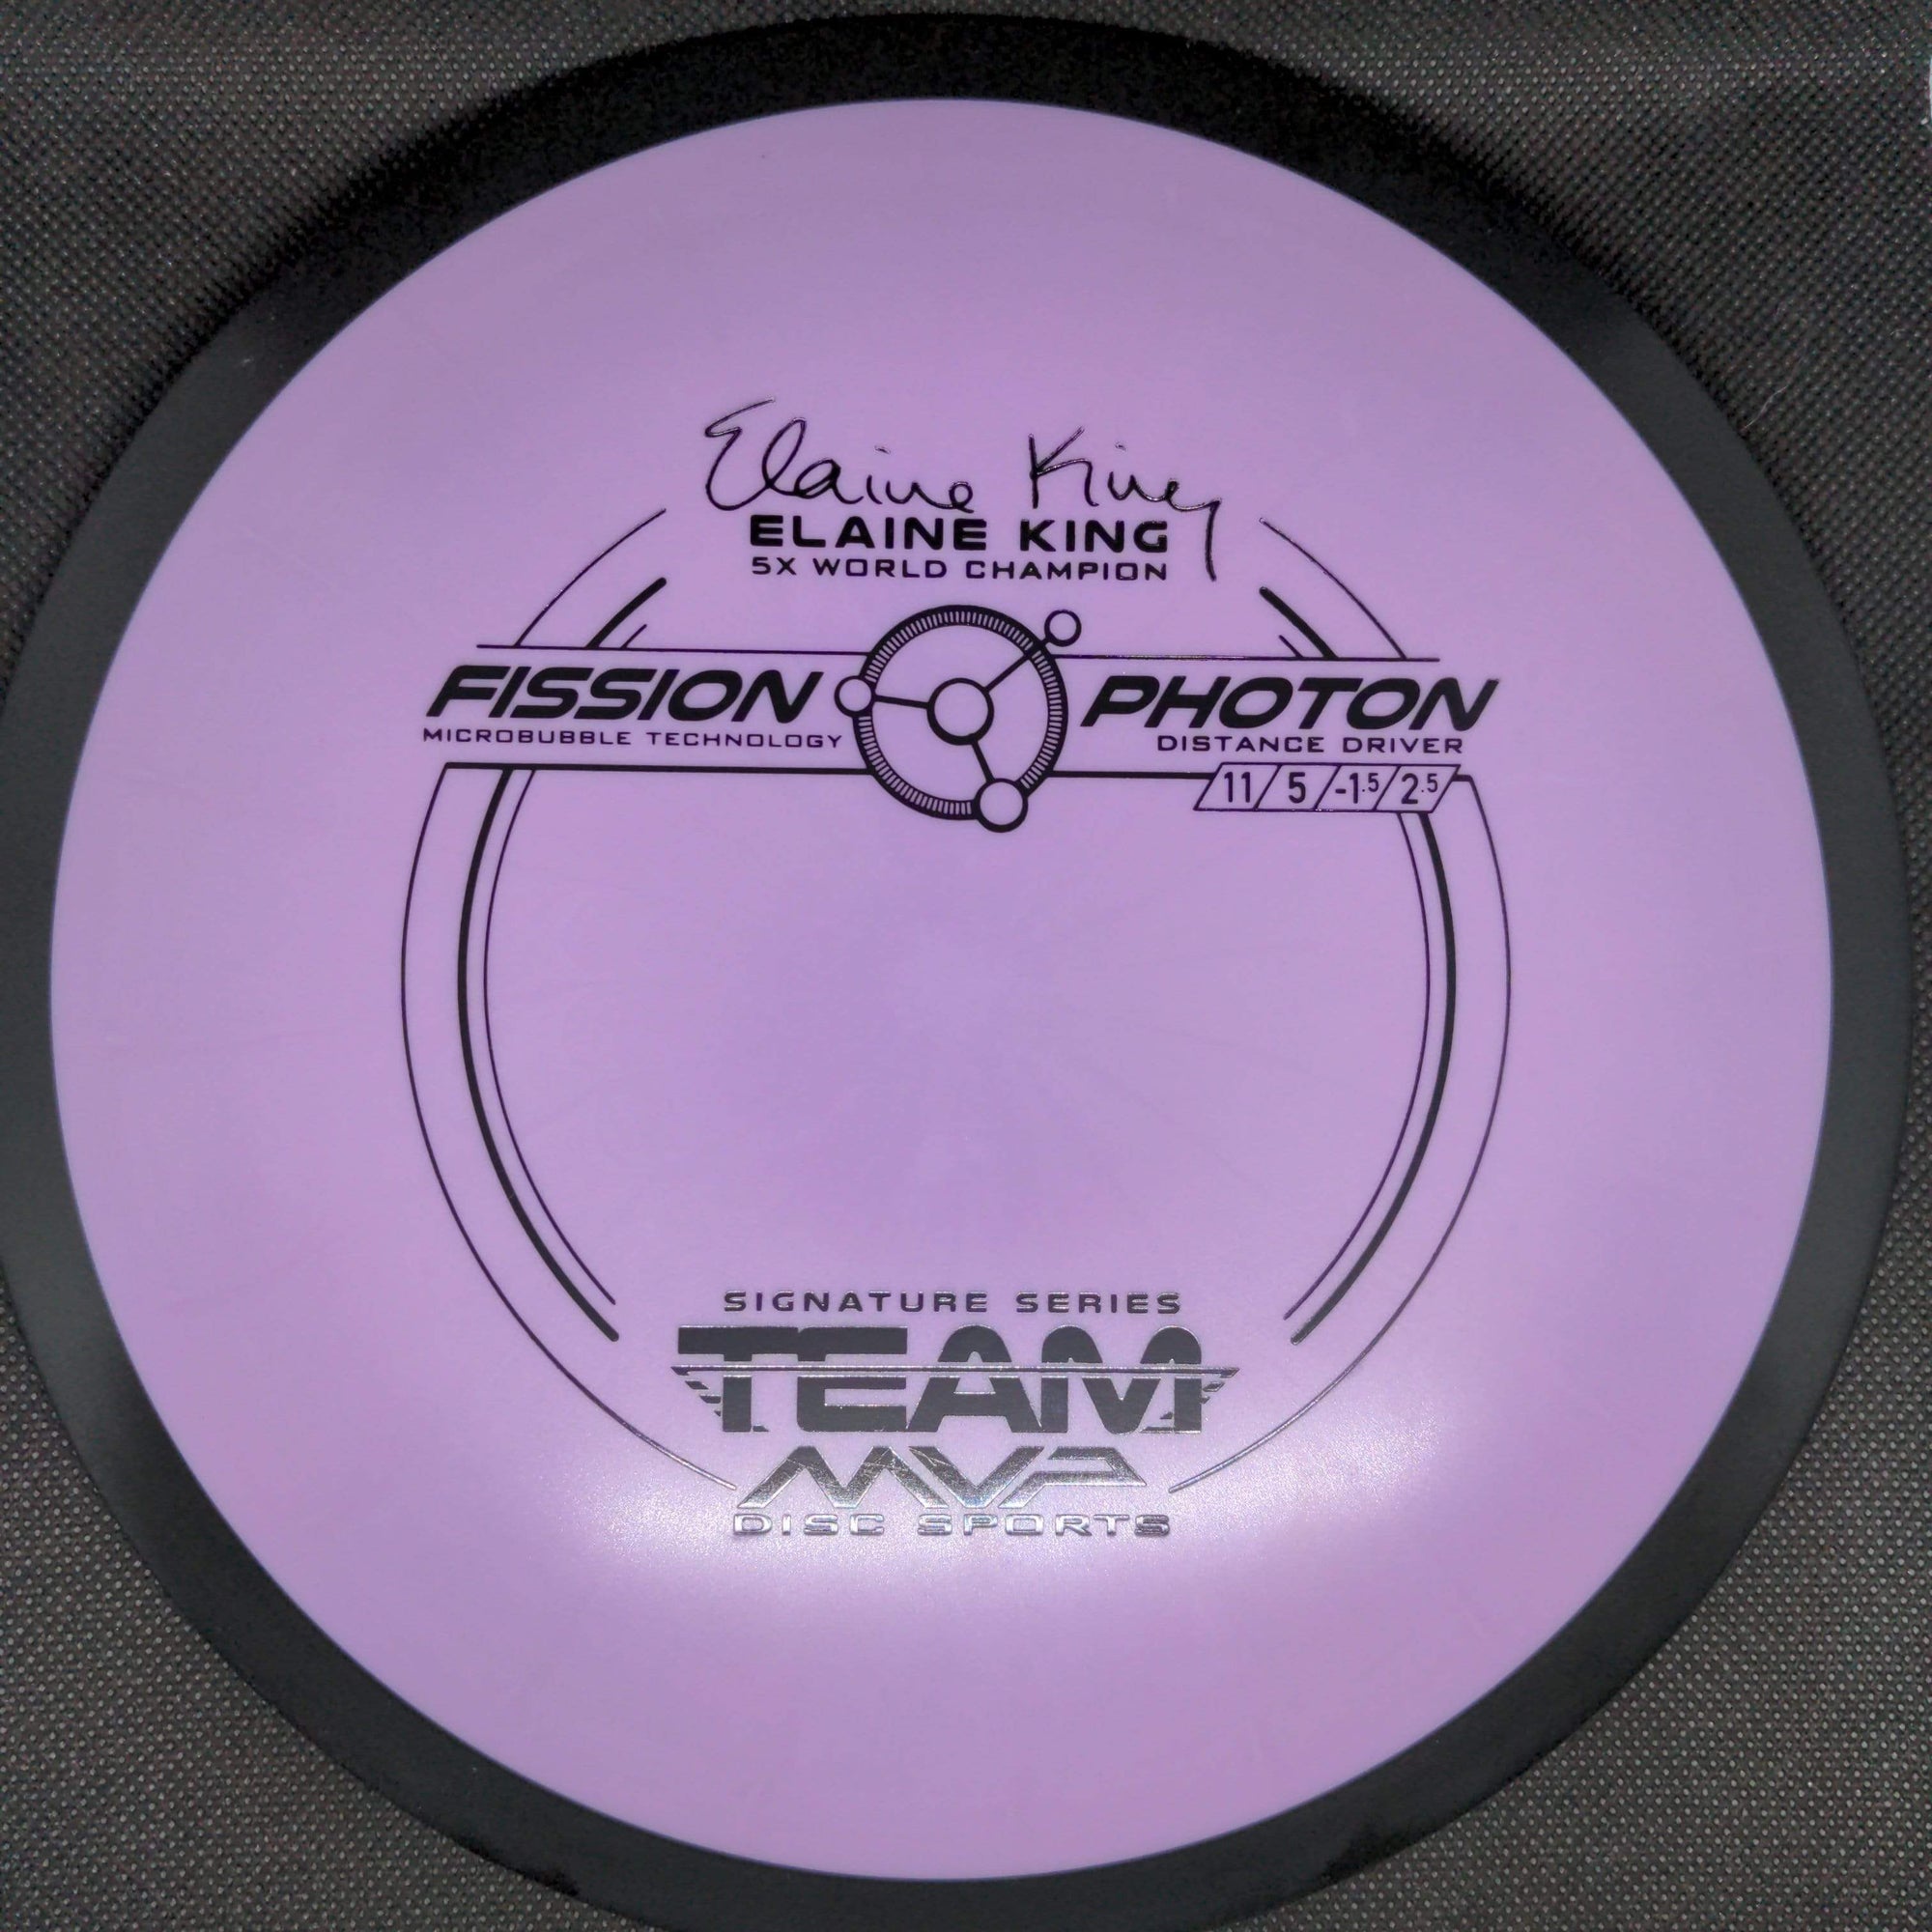 MVP Distance Driver Red 175g Fission Photon - Elaine King 5x champion